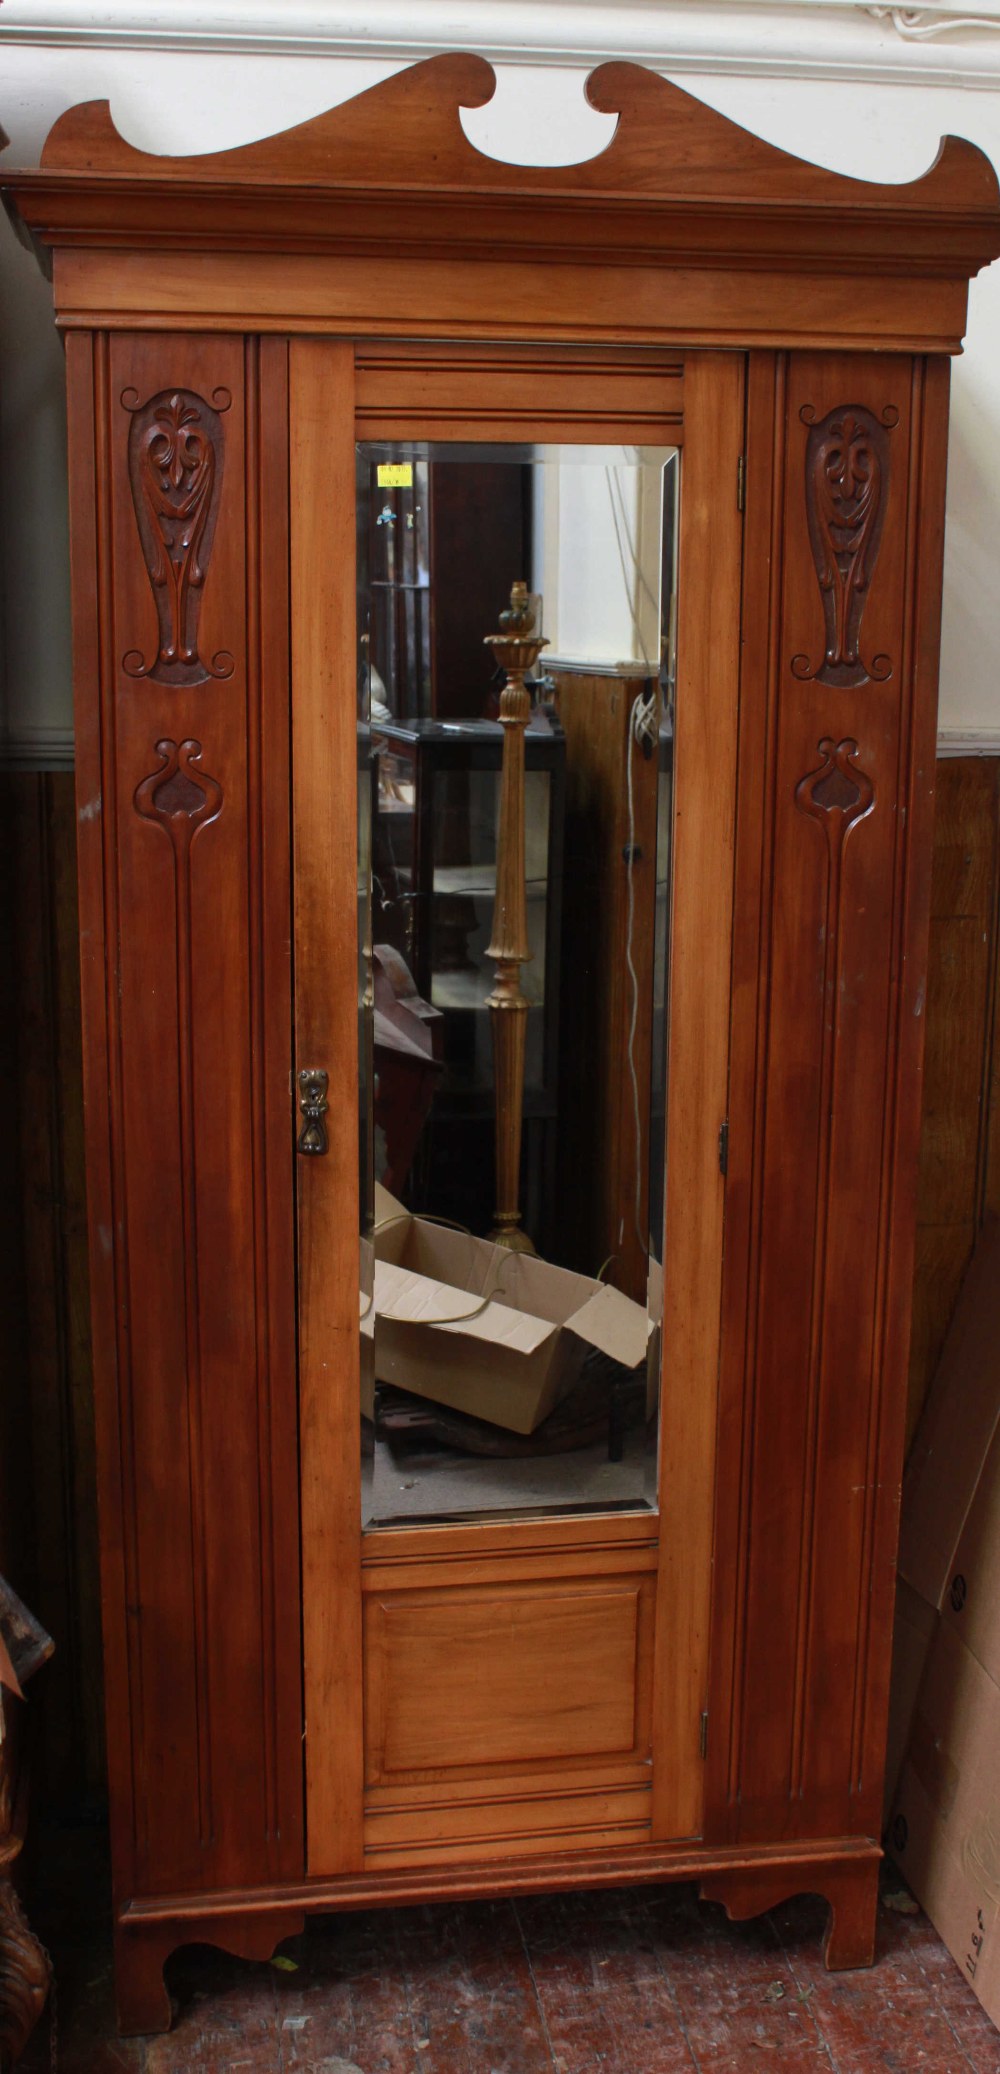 An Edwardian stained walnut single-door wardrobe, with scroll-shaped cornice above a single mirrored